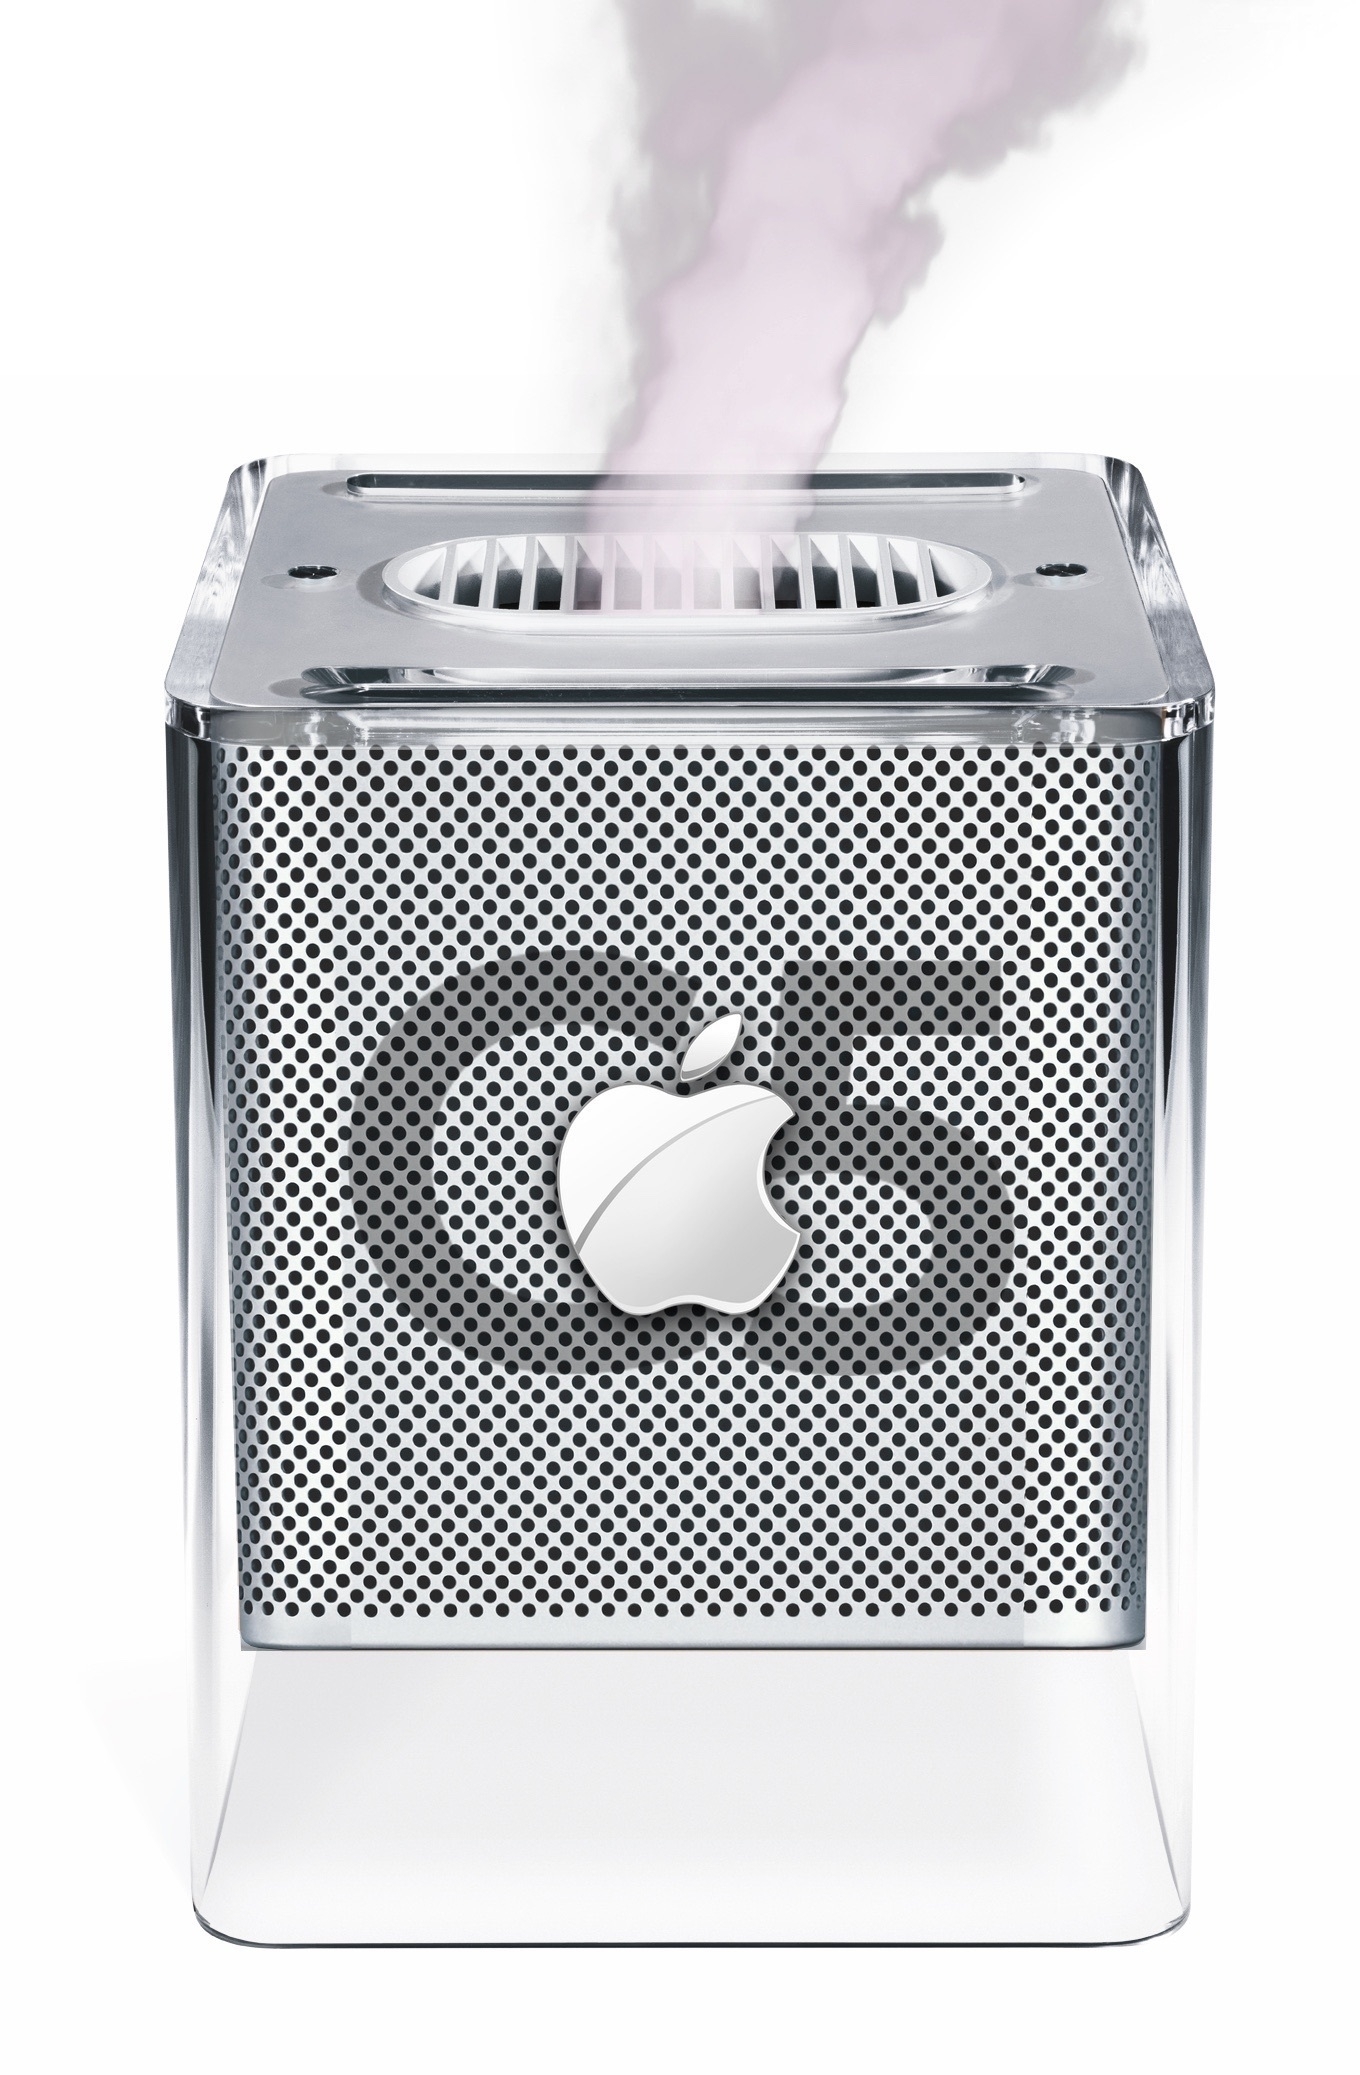 Power Mac G5 Cube emitting smoke out of its top convention cooling vent.